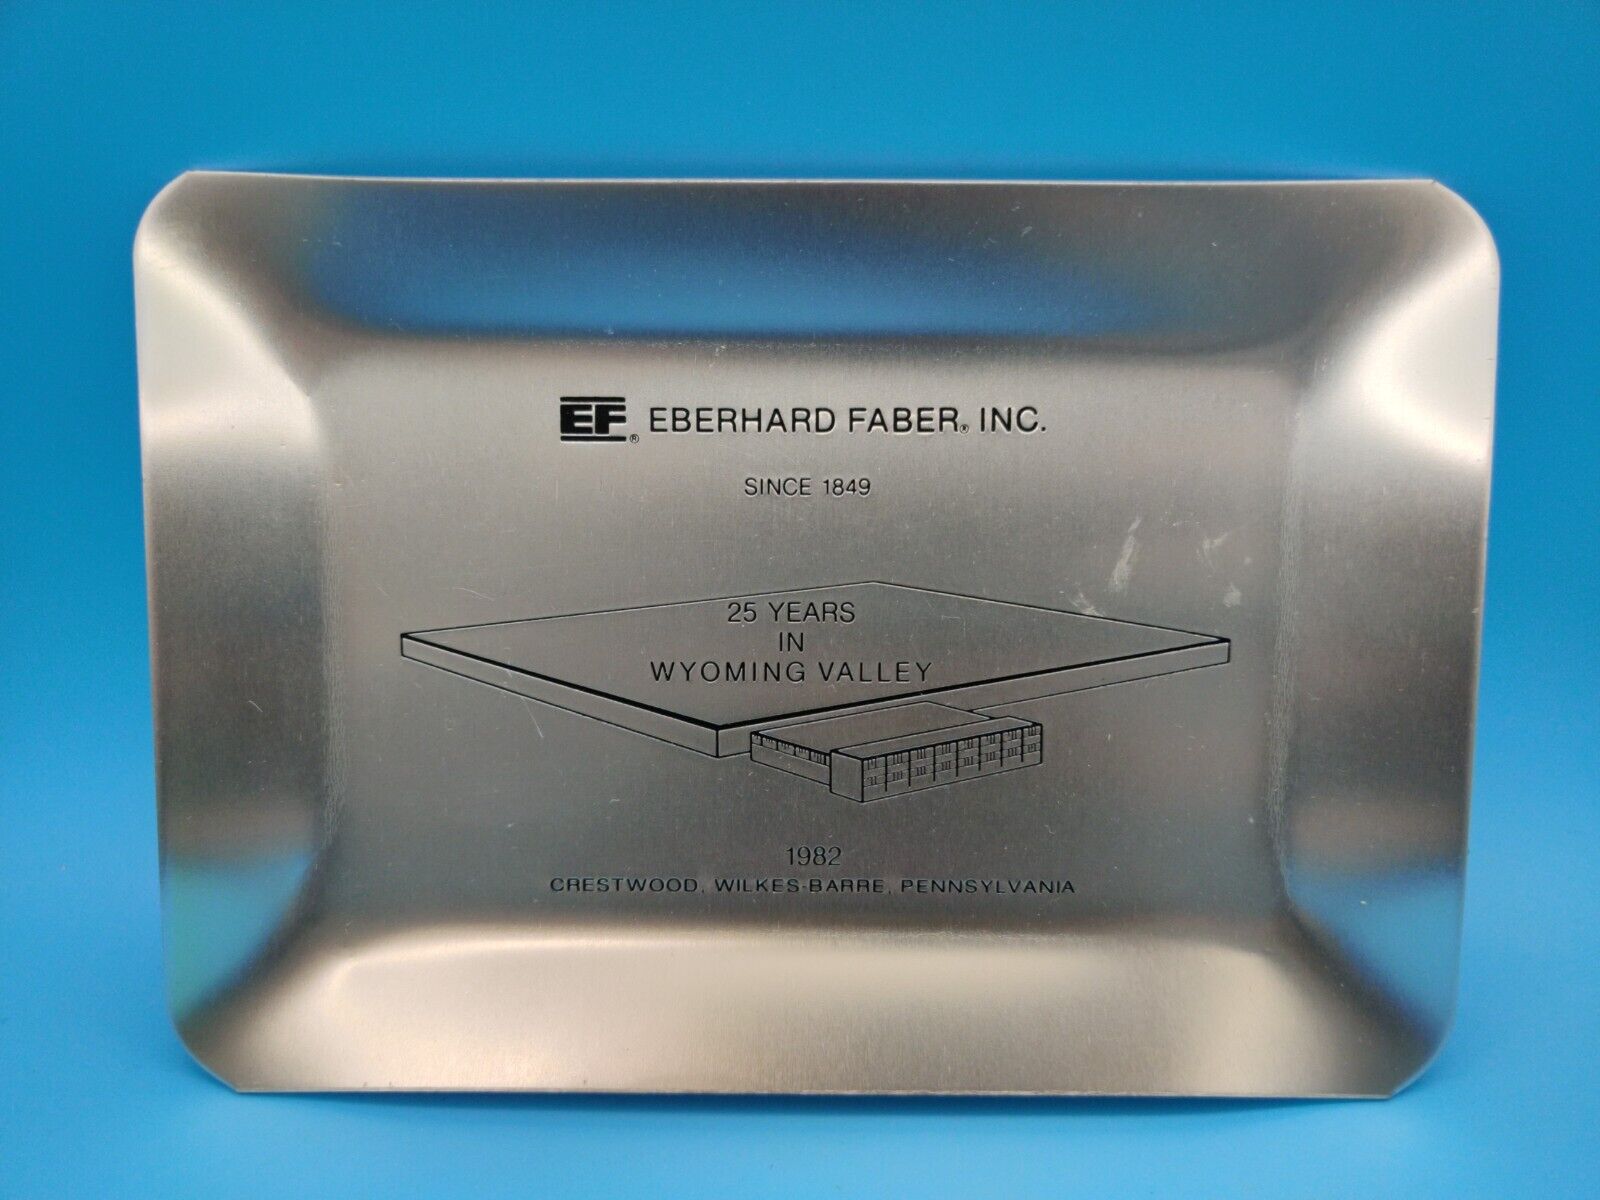 Vintage Eberhard Faber 1982 EMPLOYEE ALUMINUM TRAY 25 YEARS WILKES BARRE PA